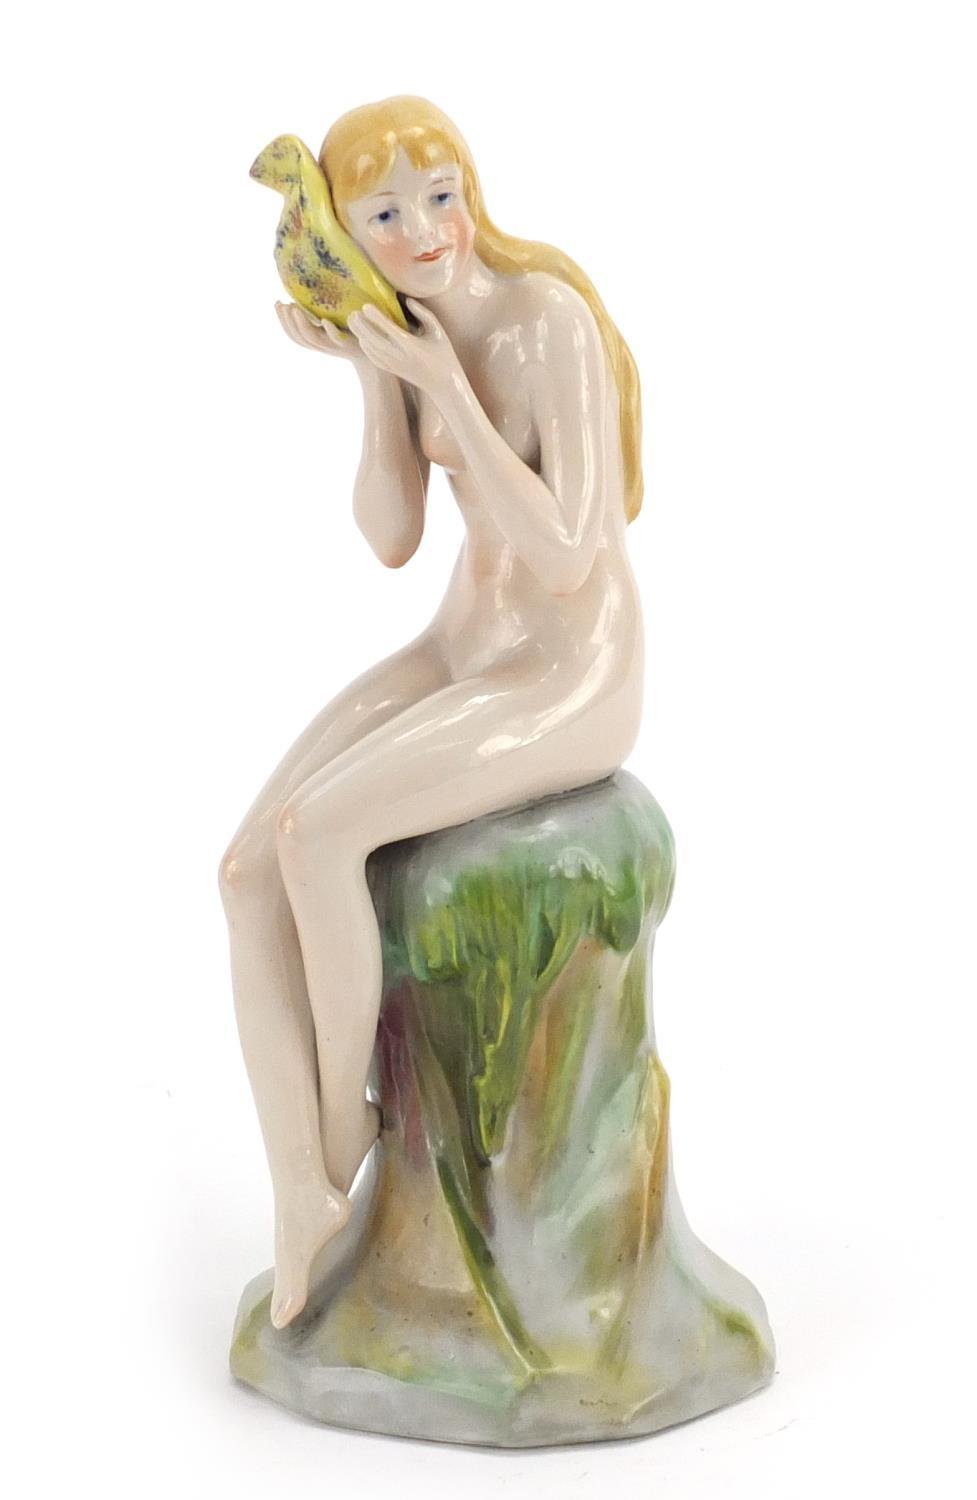 German Art Deco figurine of a nude female by Katzhutte, factory marks to the base, 22cm high :For